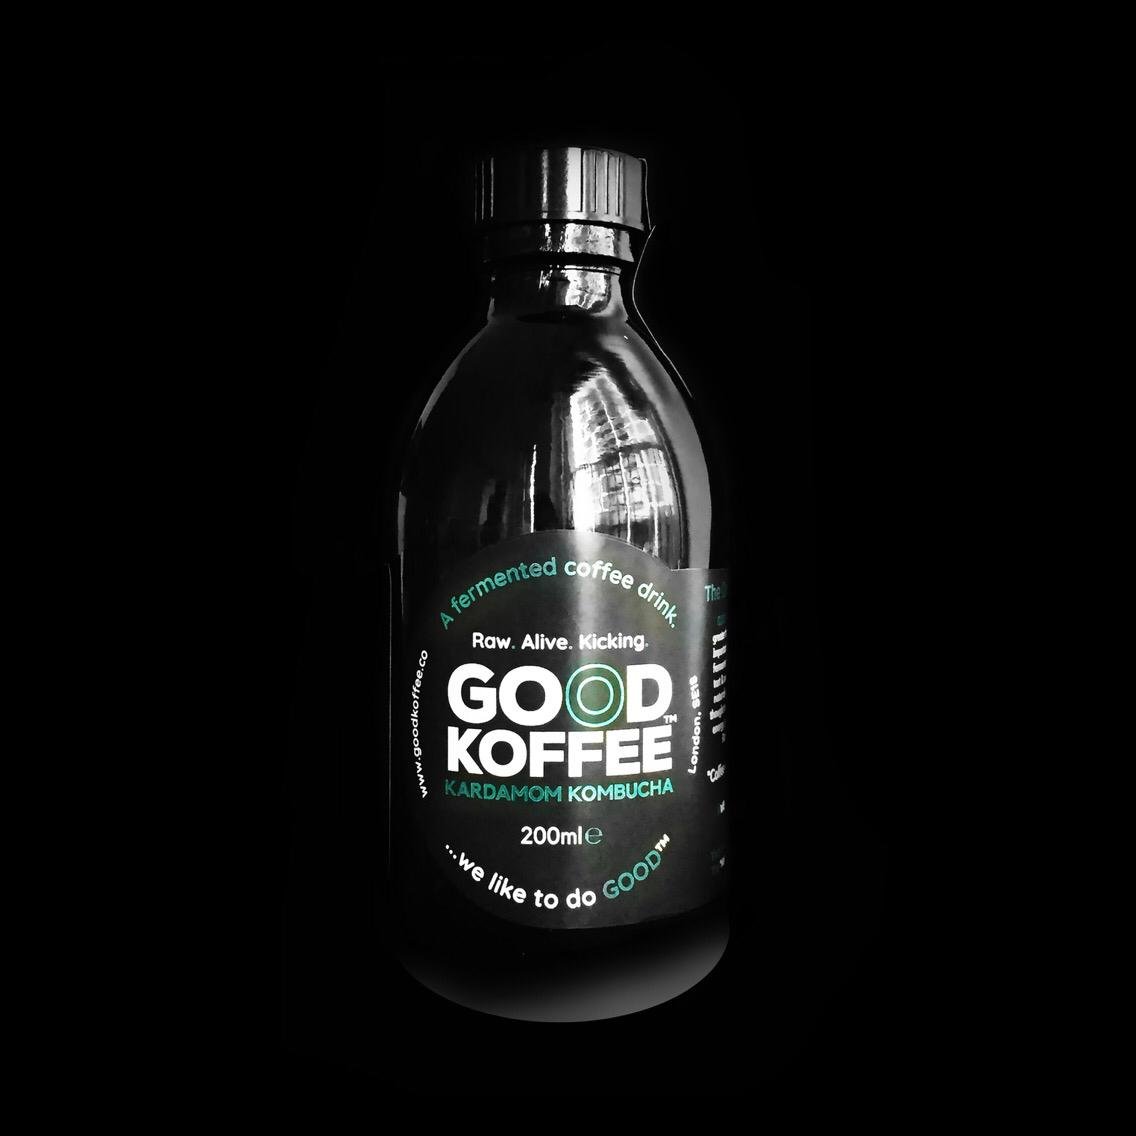 Thank you so much to our new customer @GOODKoffee for their testimonial. Your labels look great! #GoodKoffee #GoodKombucha #FeelingGood

inkreadible.com/testimonials/